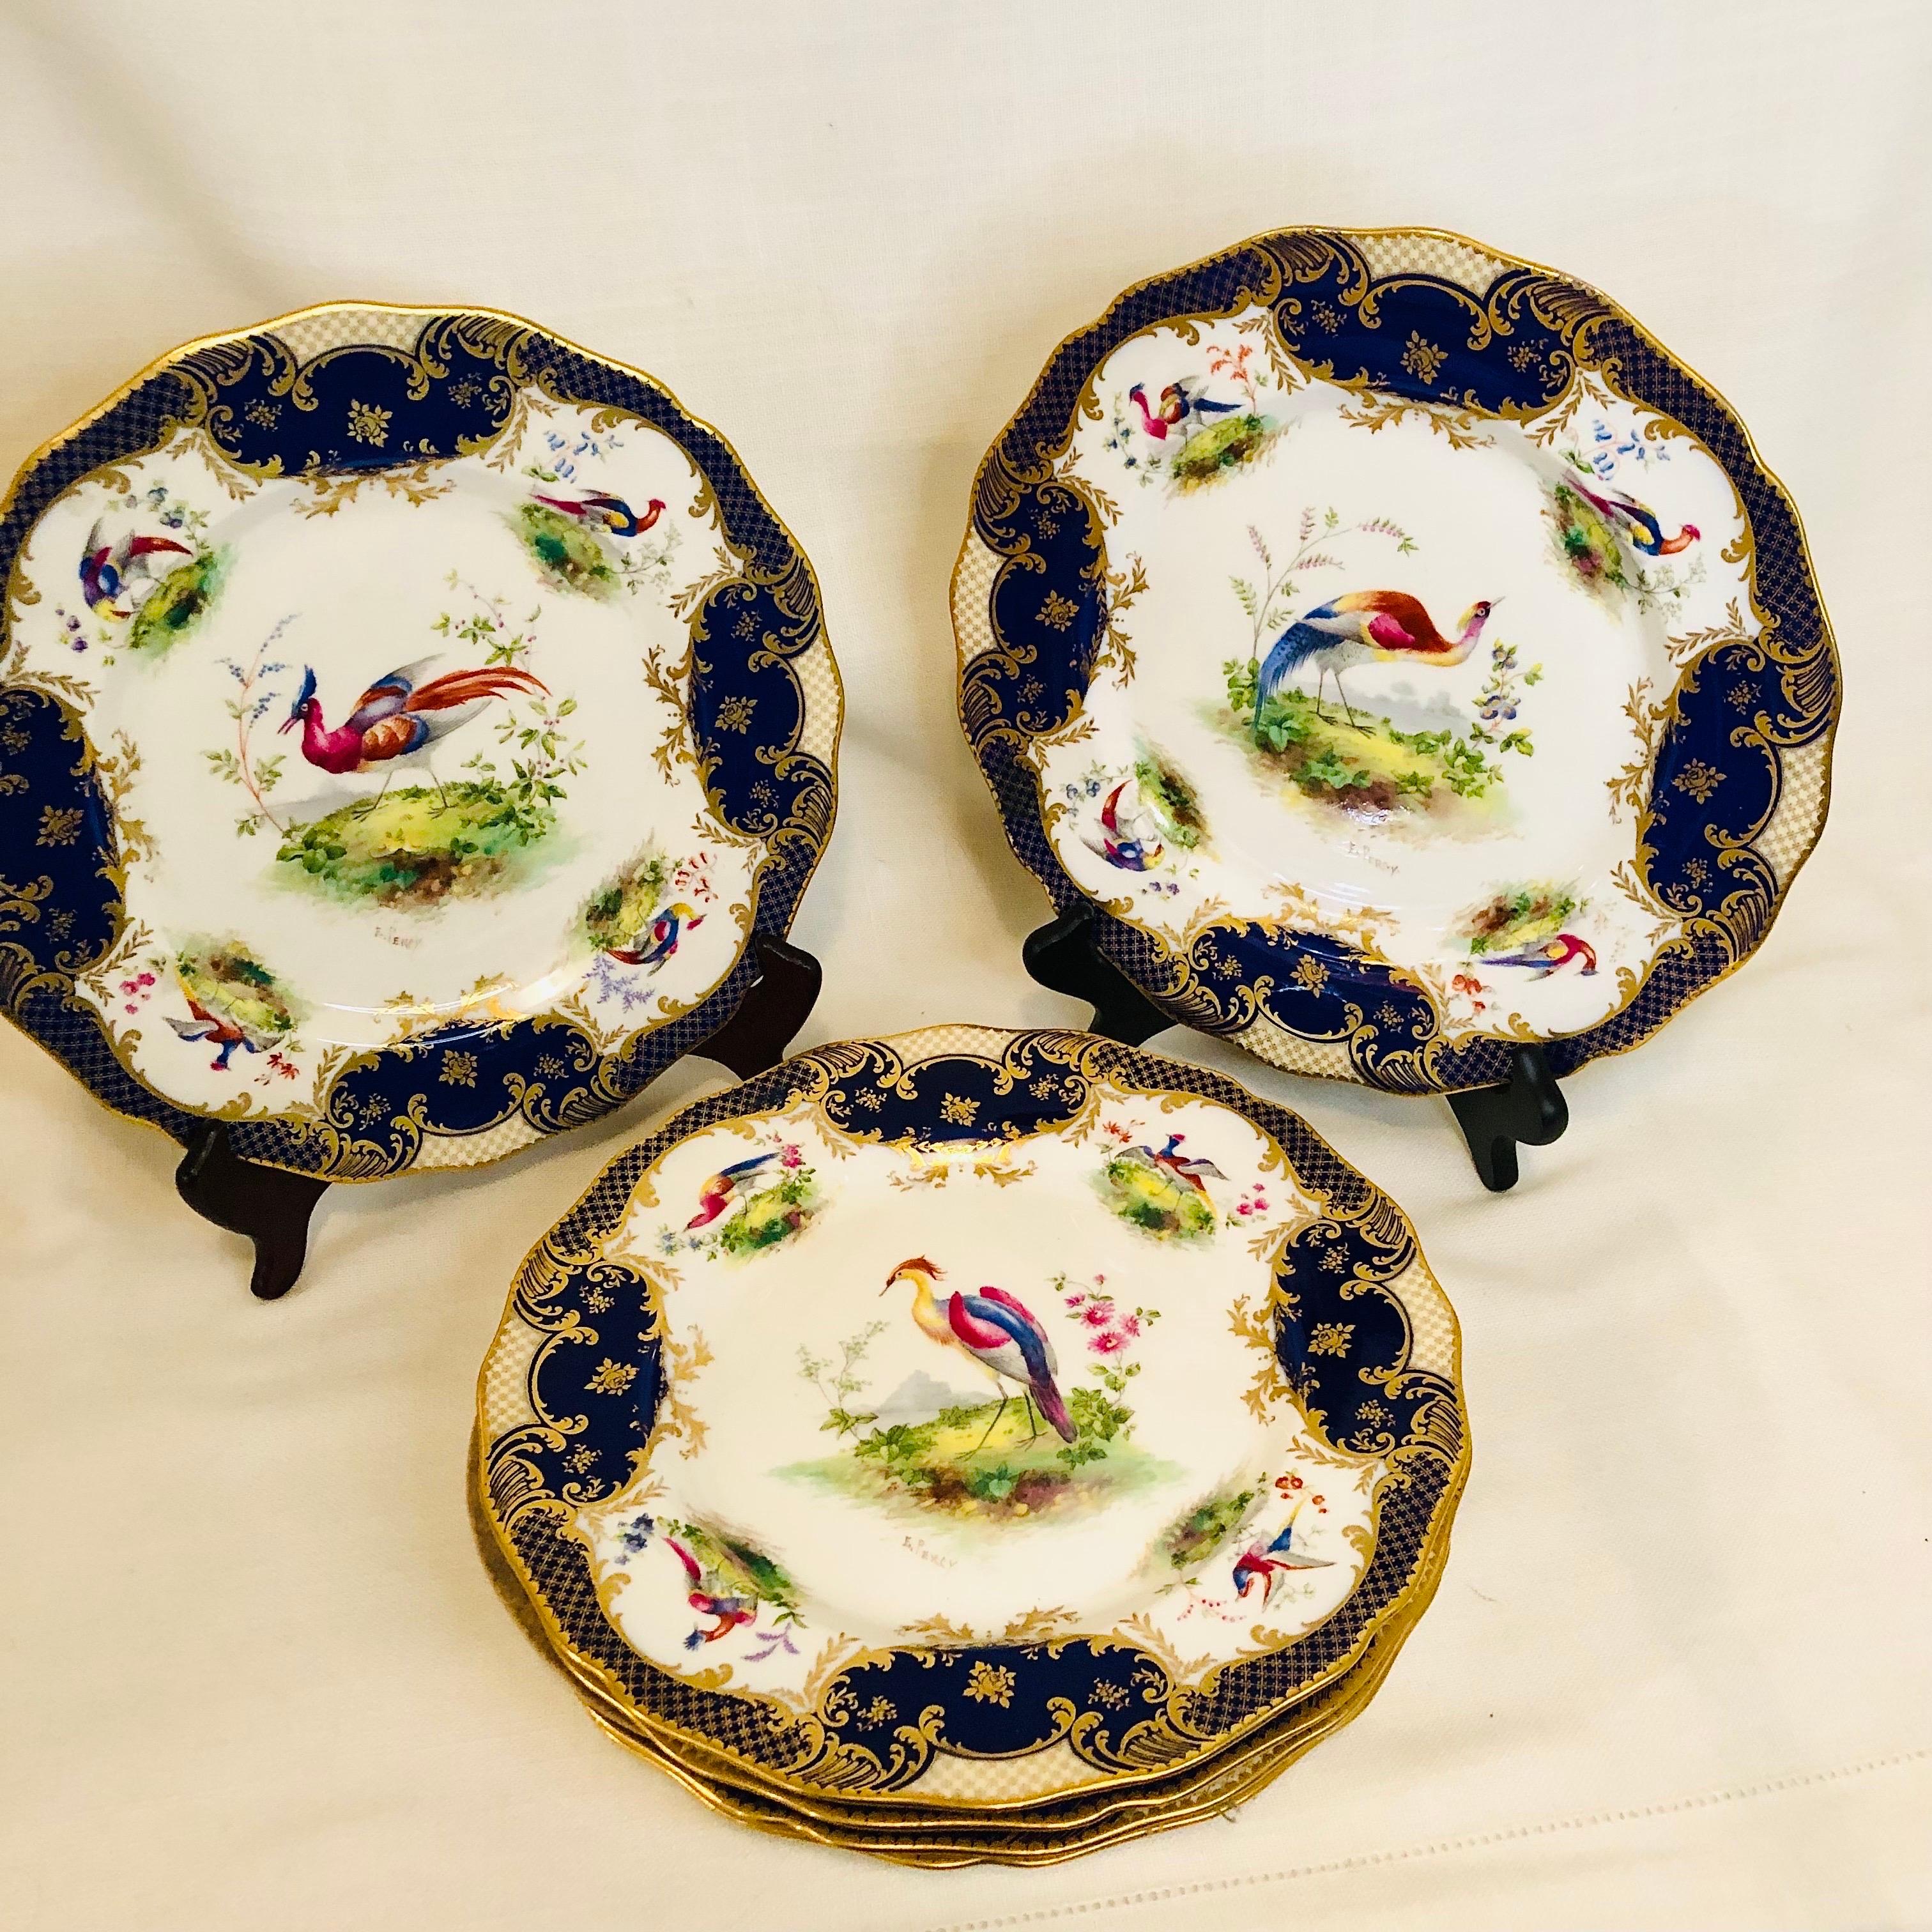 Early 20th Century Set of 6 Cobalt Royal Doulton Made for Tiffany Dinner Plates with Exotic Birds